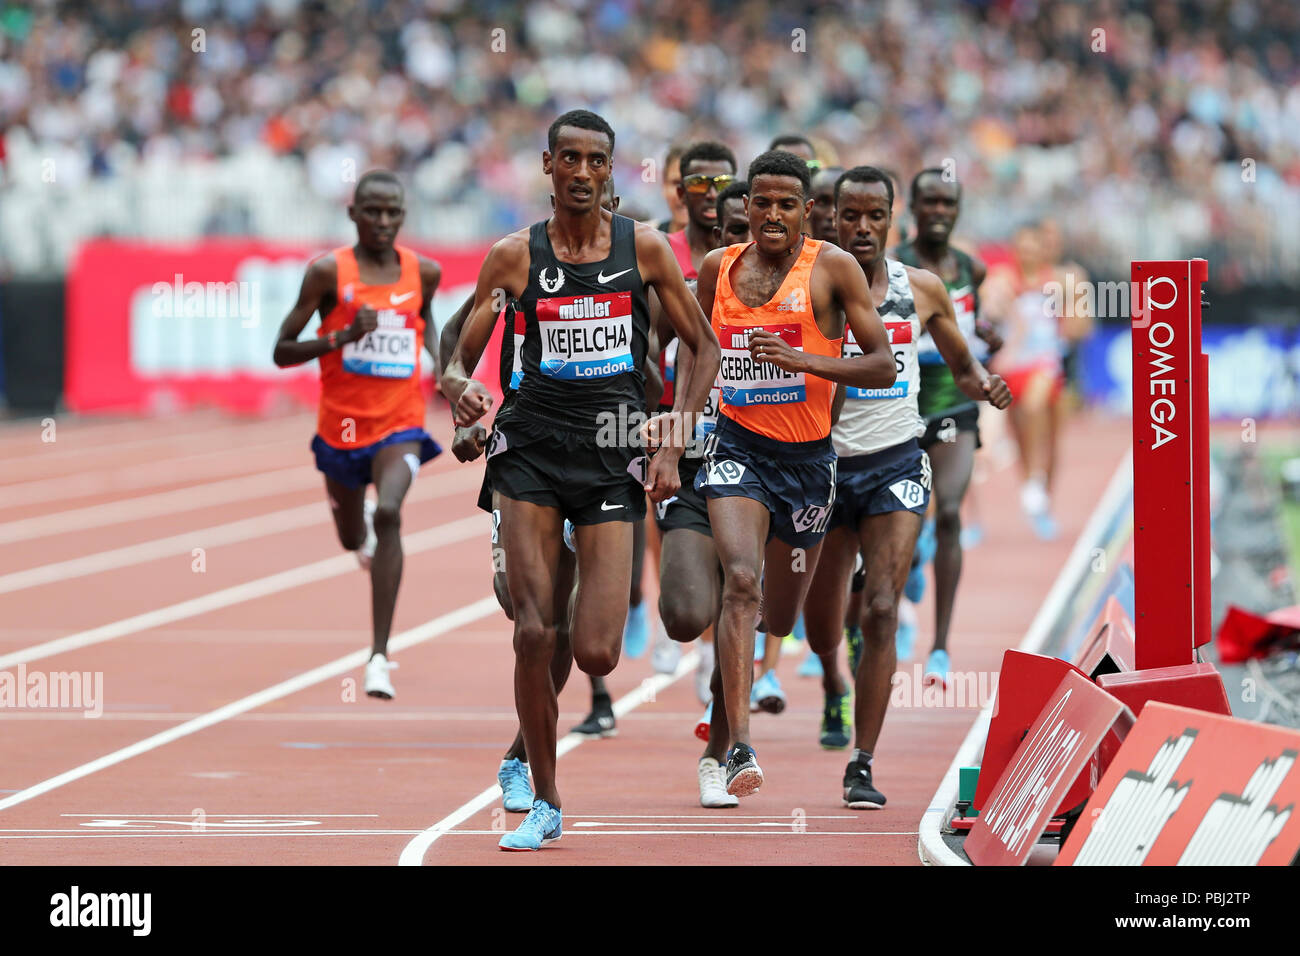 Yomif KEJELCHA (Ethiopia), Hagos GEBRHIWET (Ethiopia) competing in the Men's 5000m Final at the 2018, IAAF Diamond League, Anniversary Games, Queen Elizabeth Olympic Park, Stratford, London, UK. Stock Photo